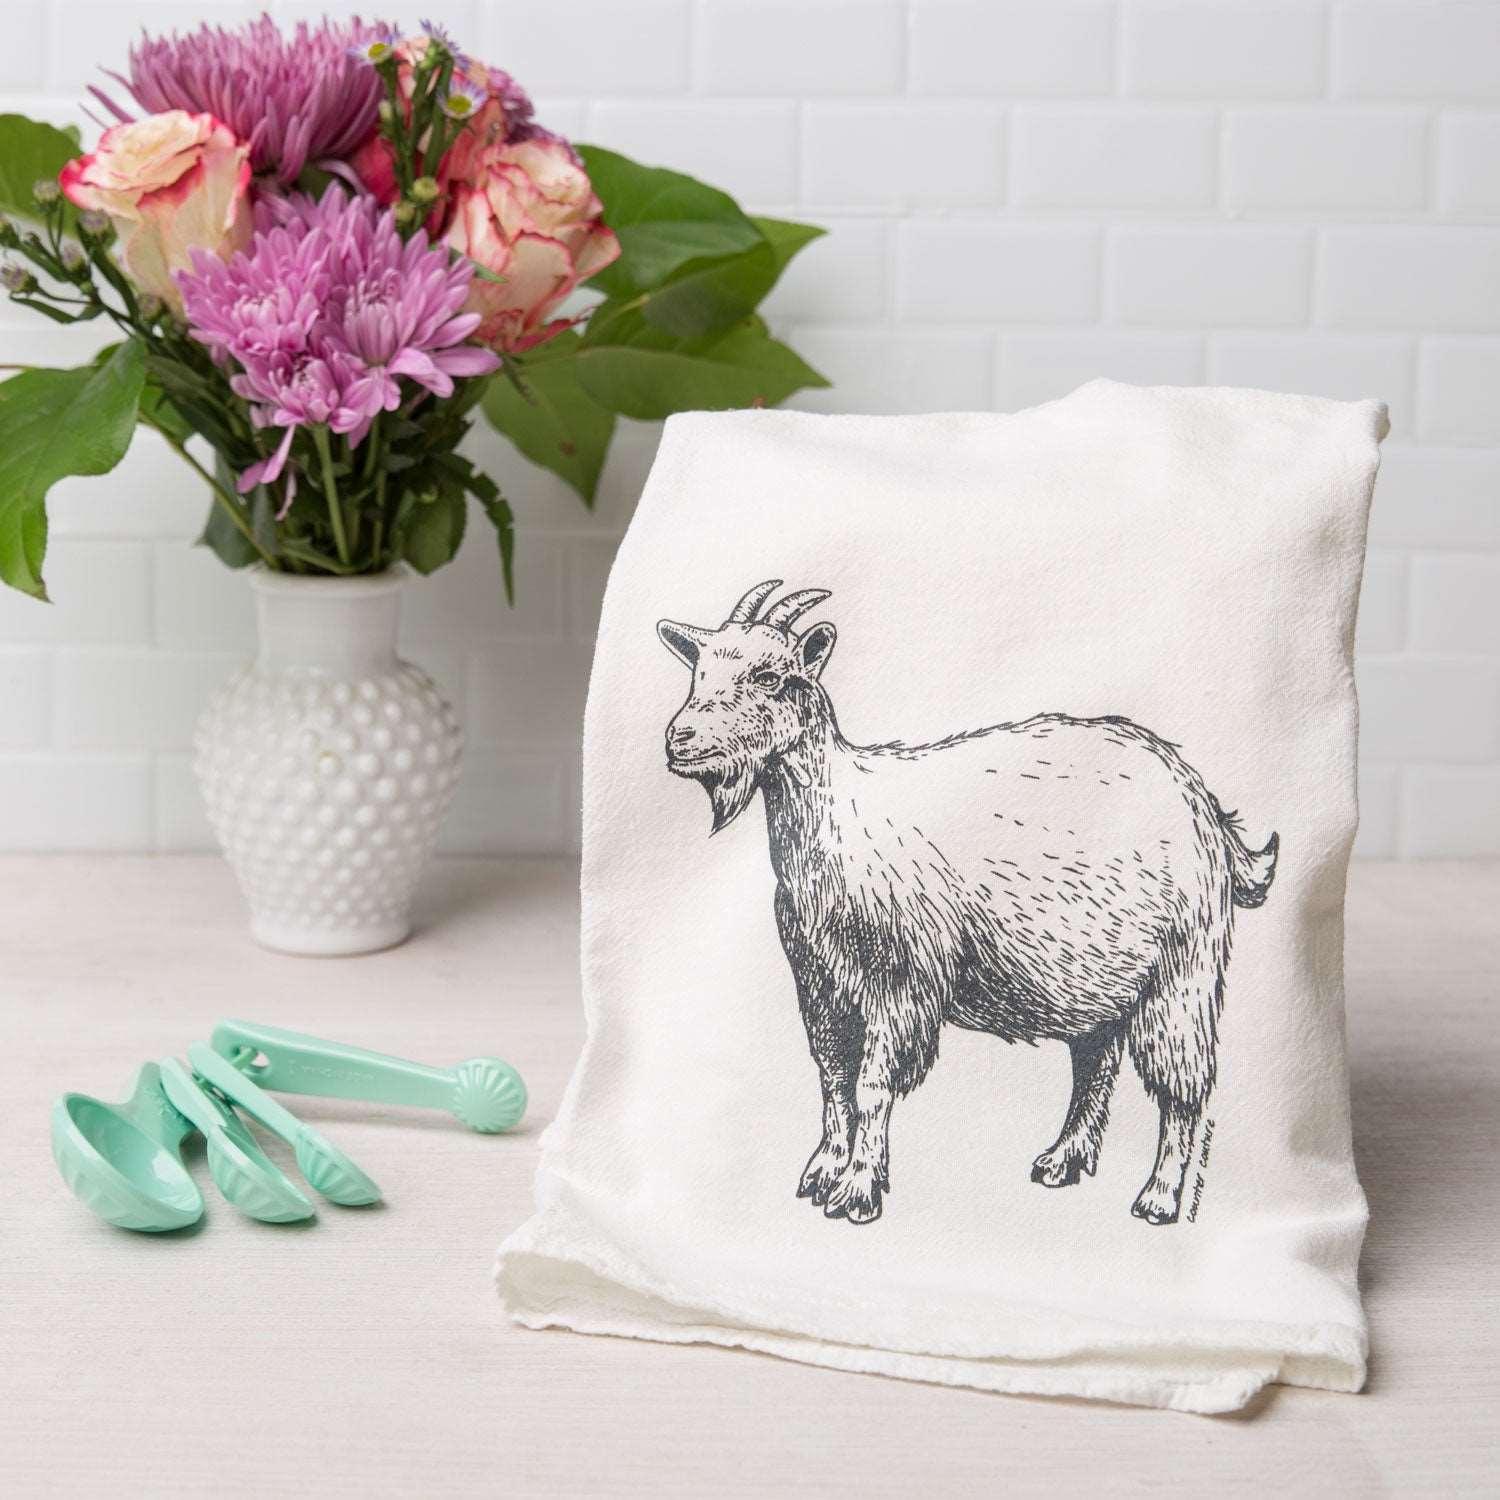 Goat Printed Tea Towel - Kitchen Towel - Hand Towel - Counter Couture